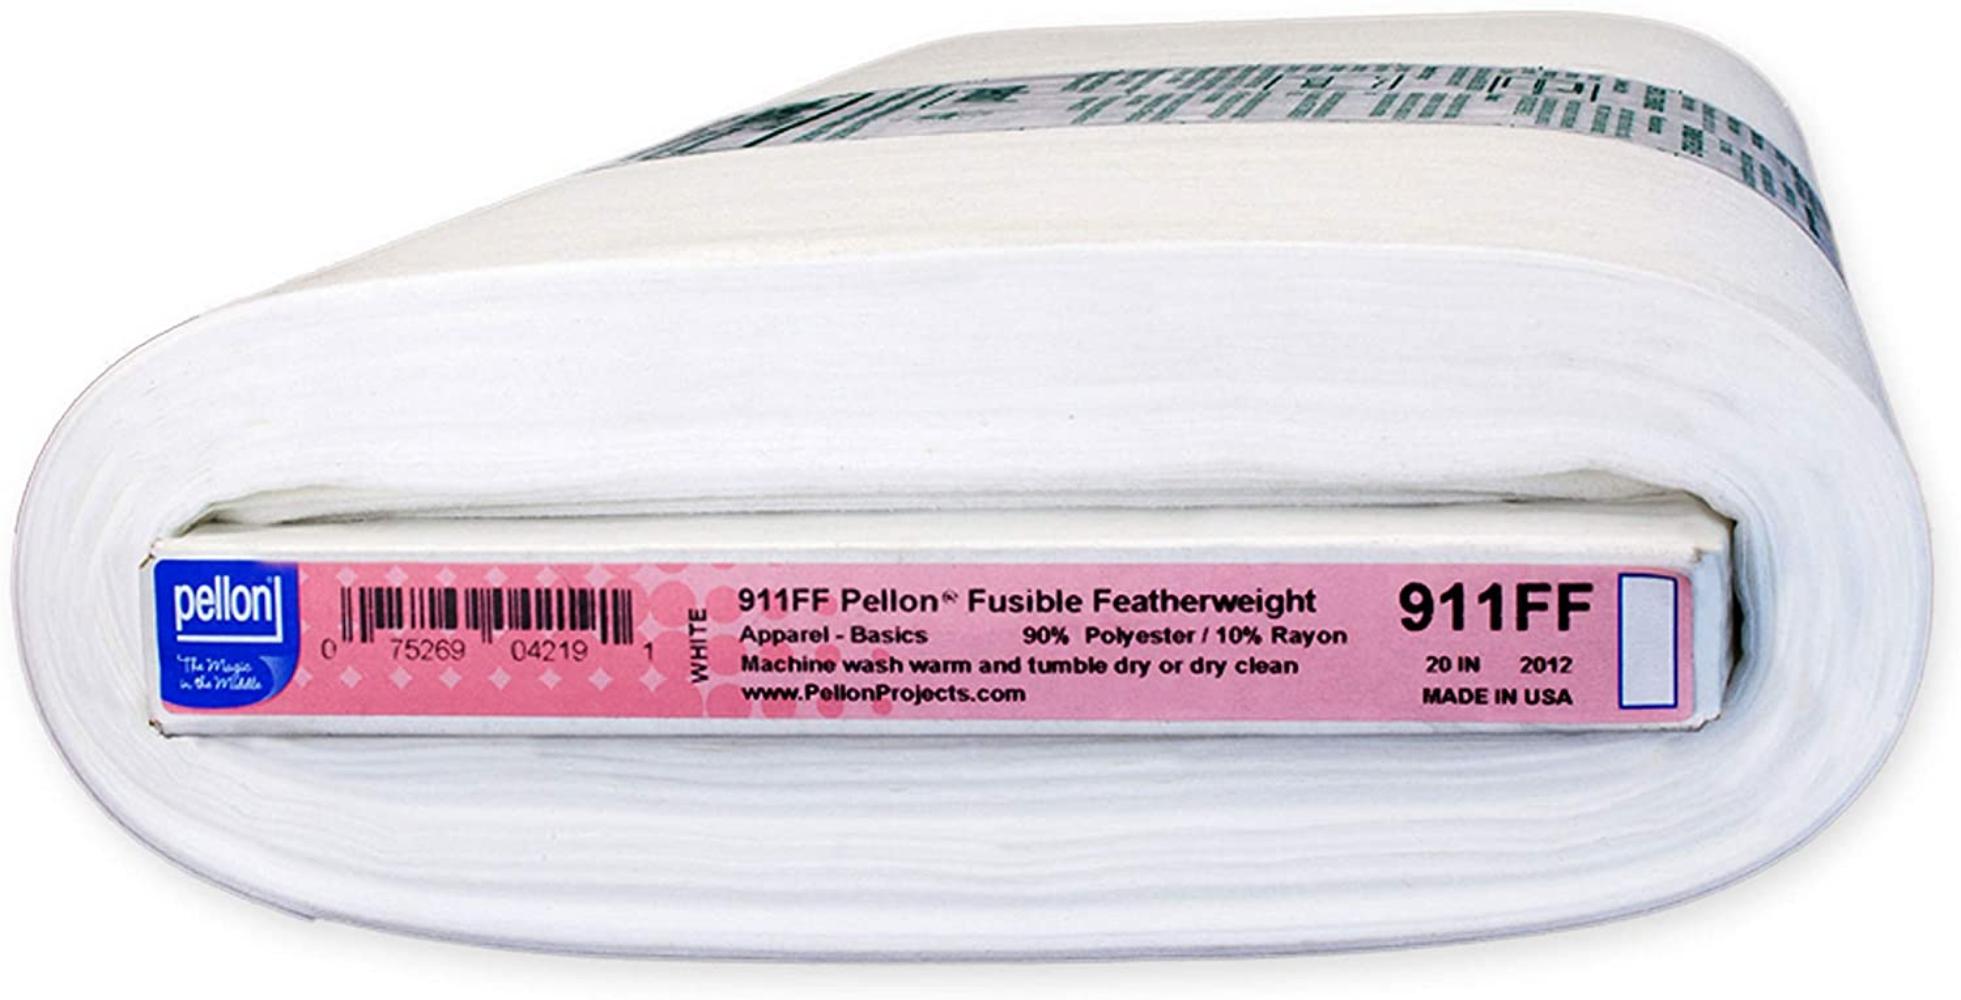 911FF - Featherweight Fusible